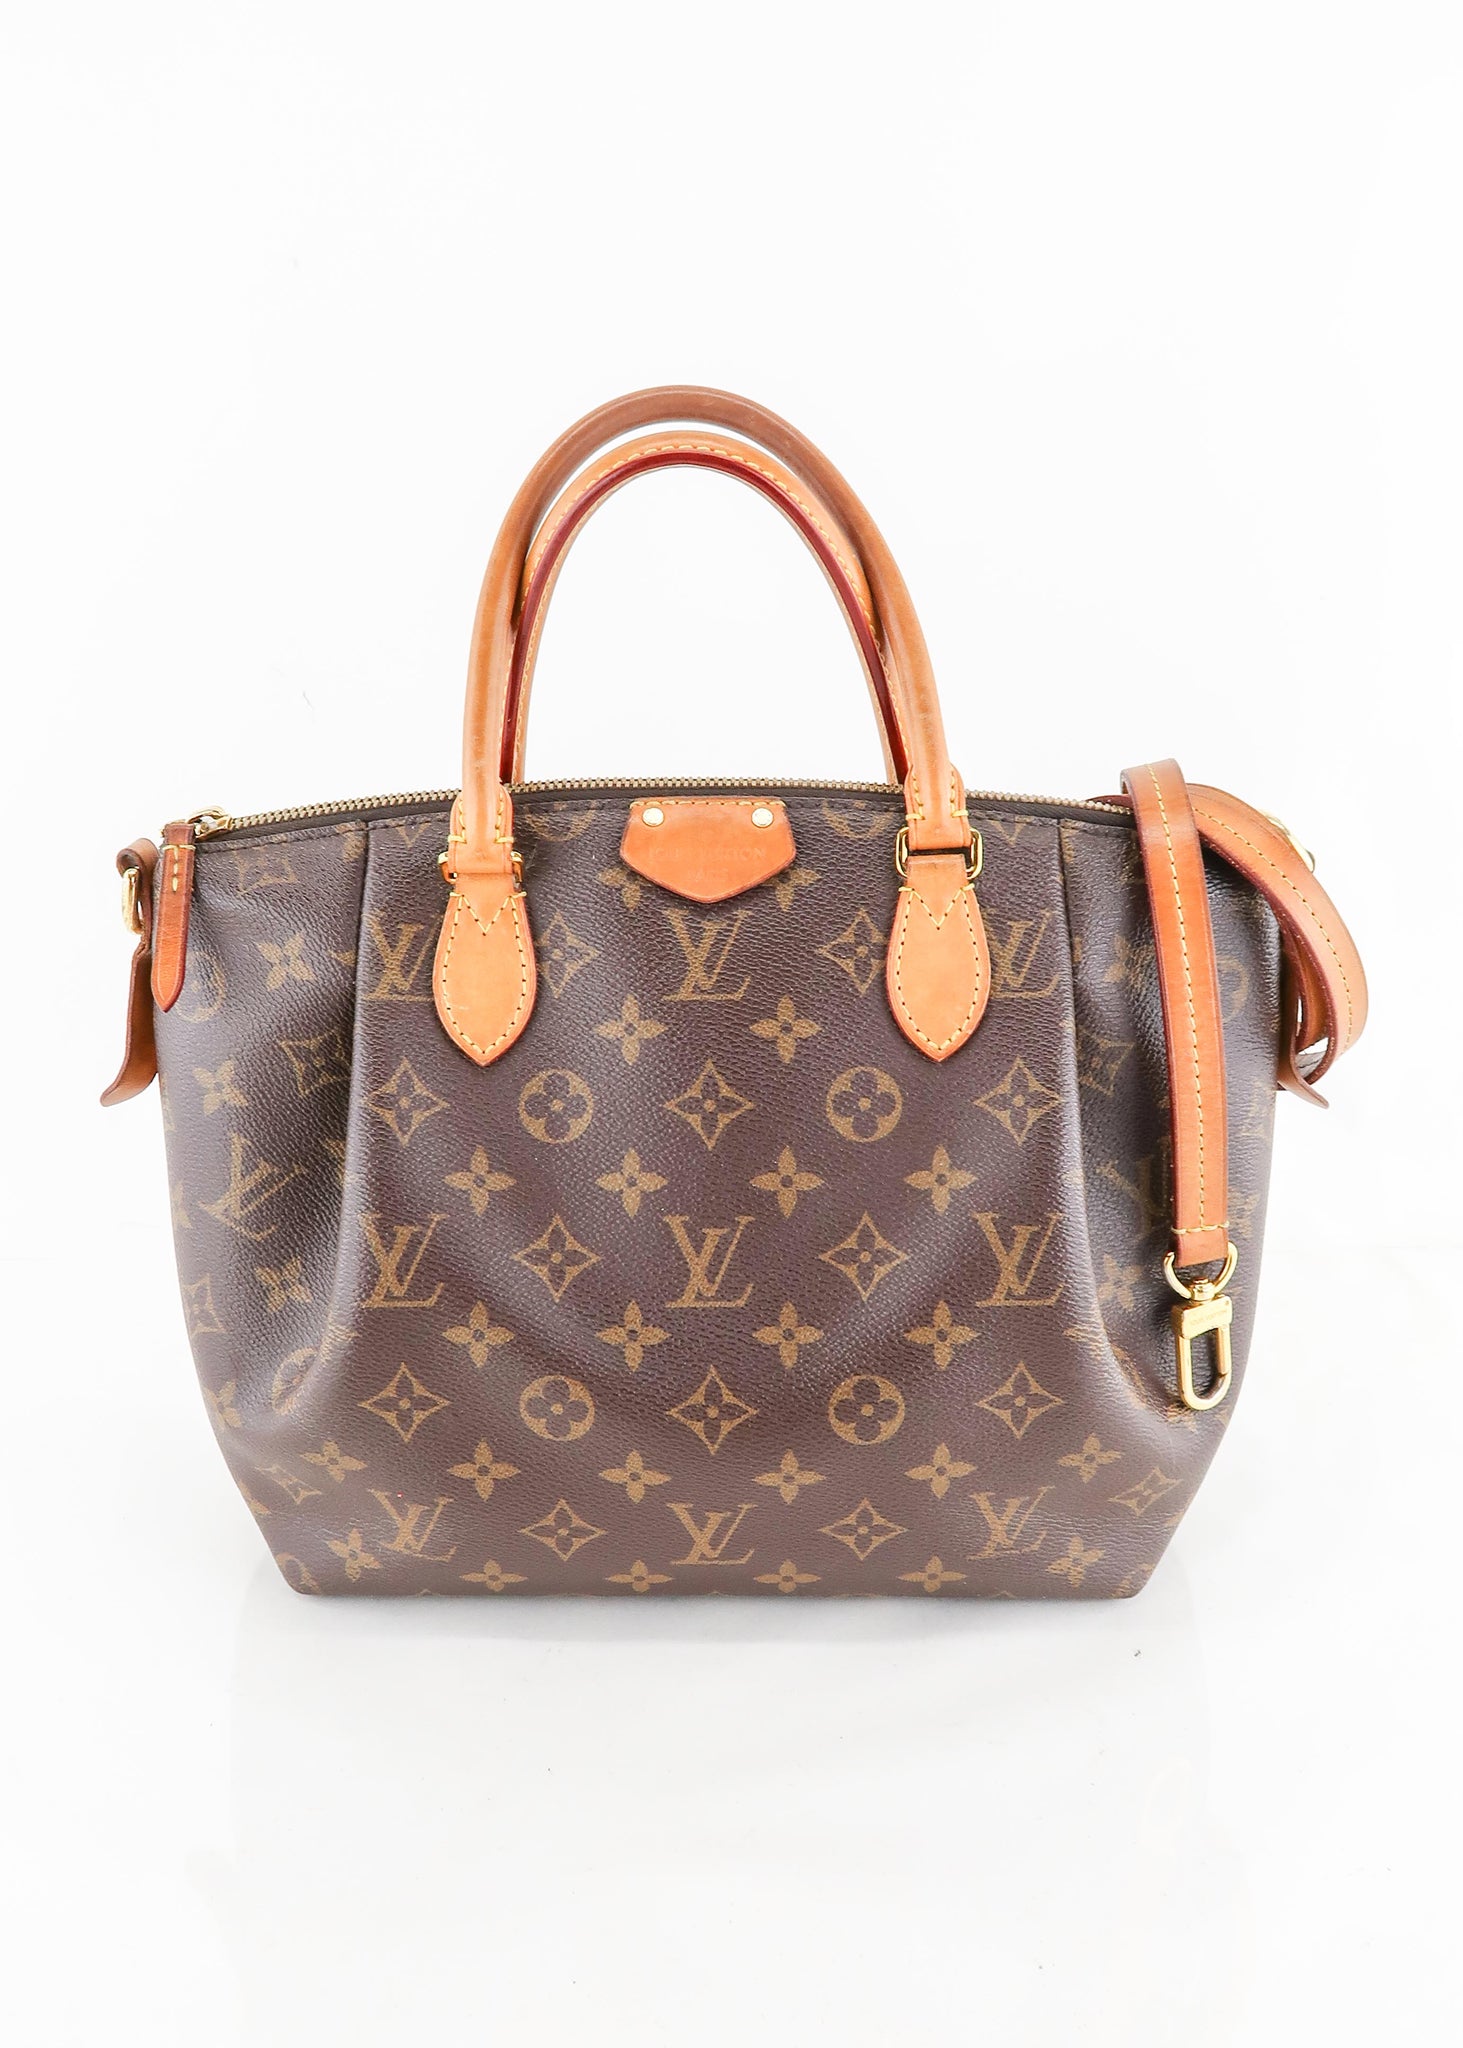 How small is small? Compare Louis Vuitton Nano Turenne and